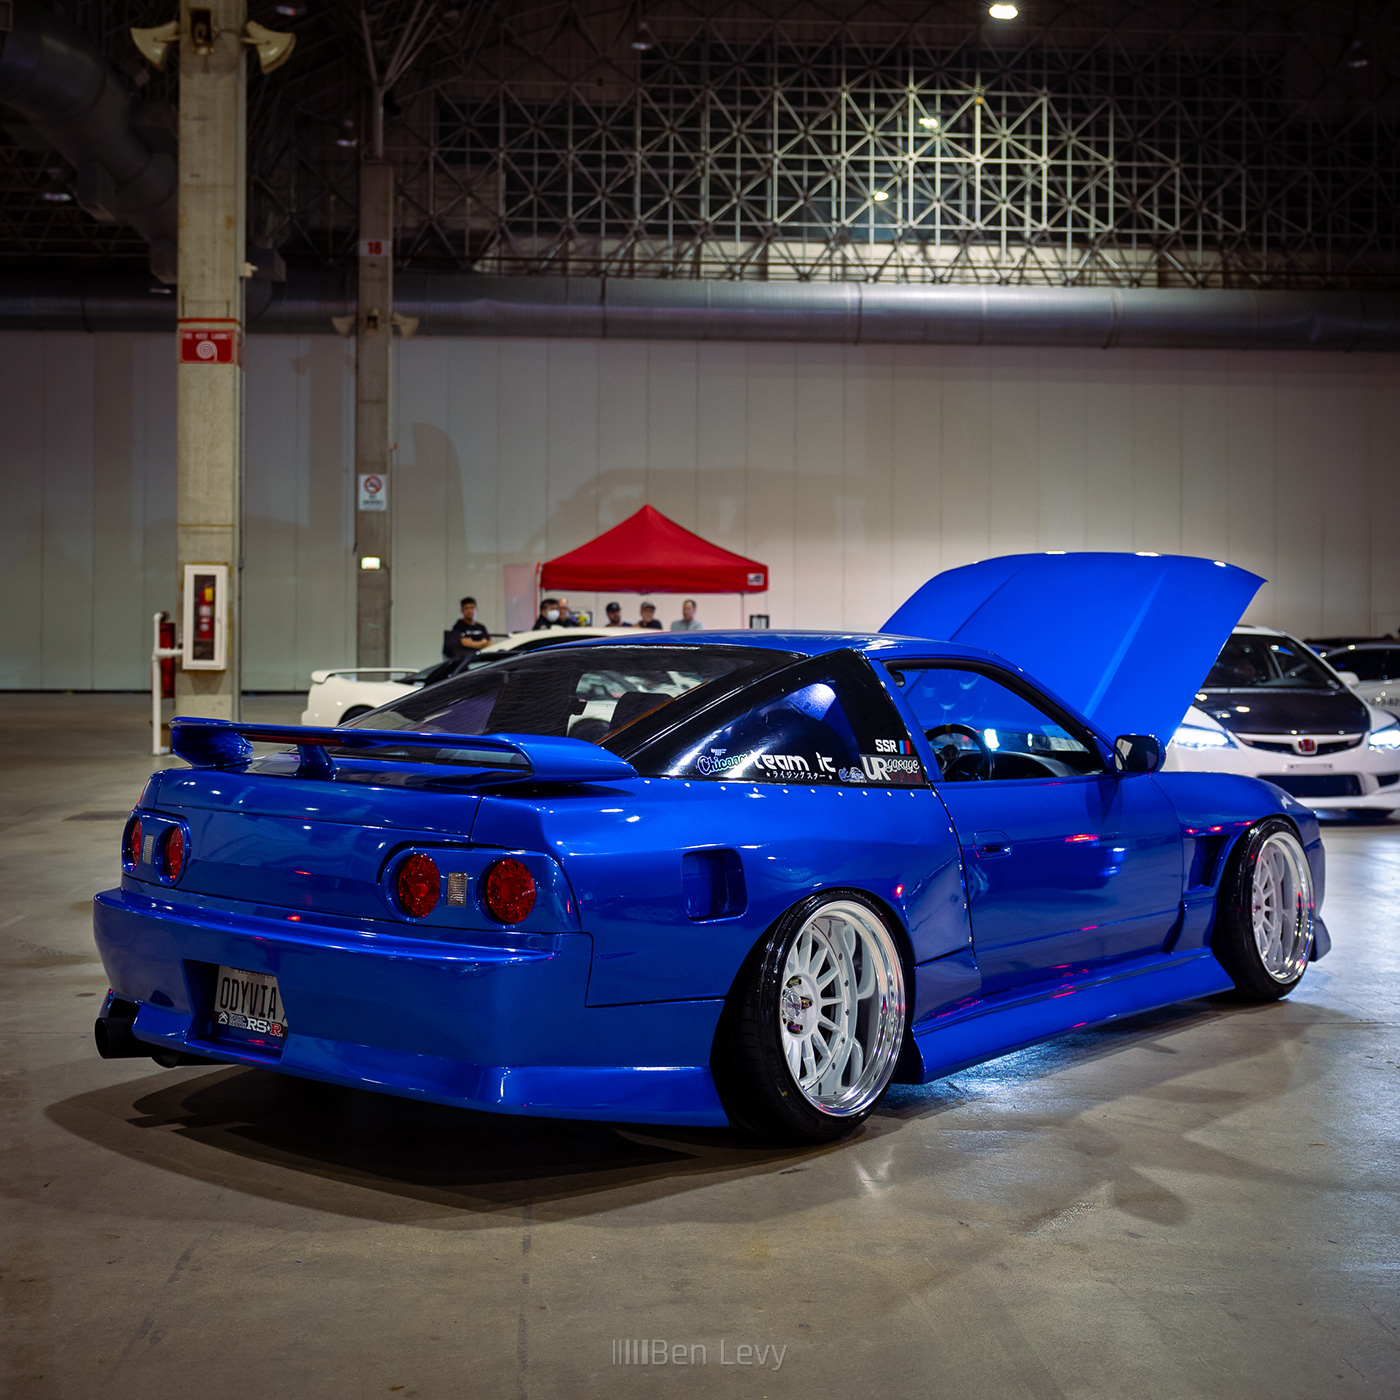 Blue Nissan 240SX with Tail Light Conversion at Wekfest